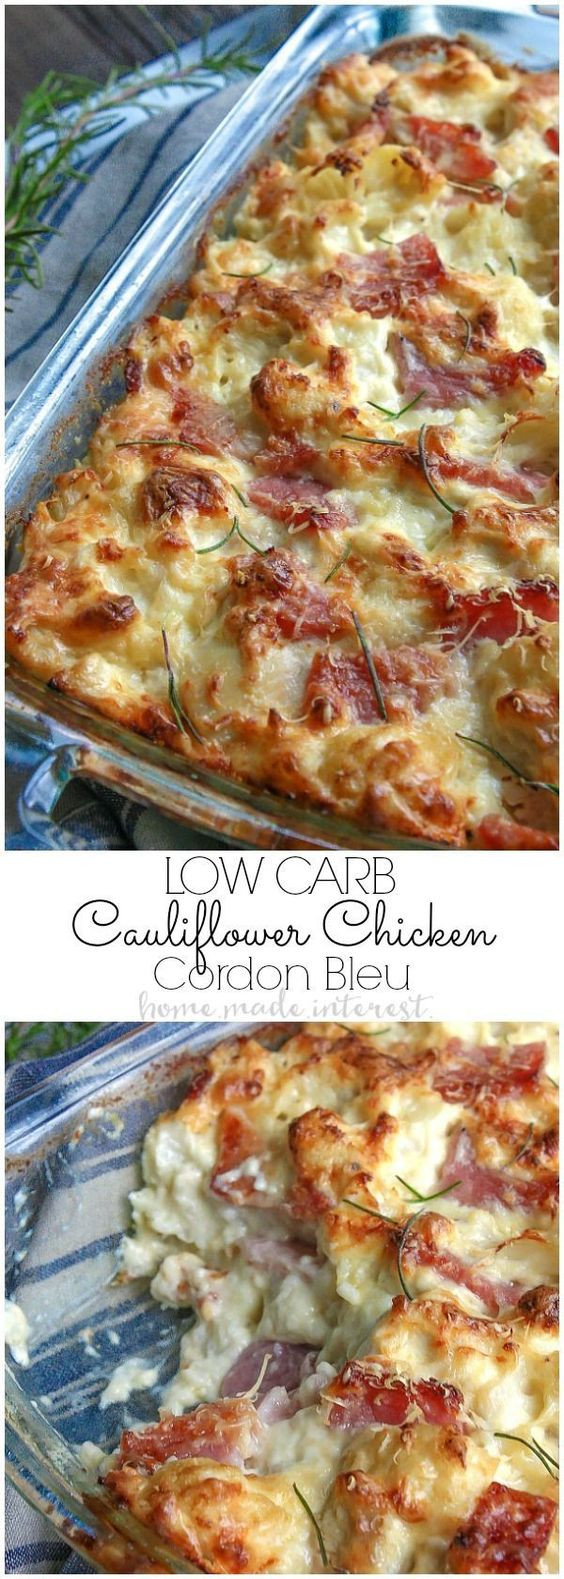 Low Carb Canned Chicken Recipes Lovely 32 Canned Chicken Recipes for Delicious Meals You Ll Use